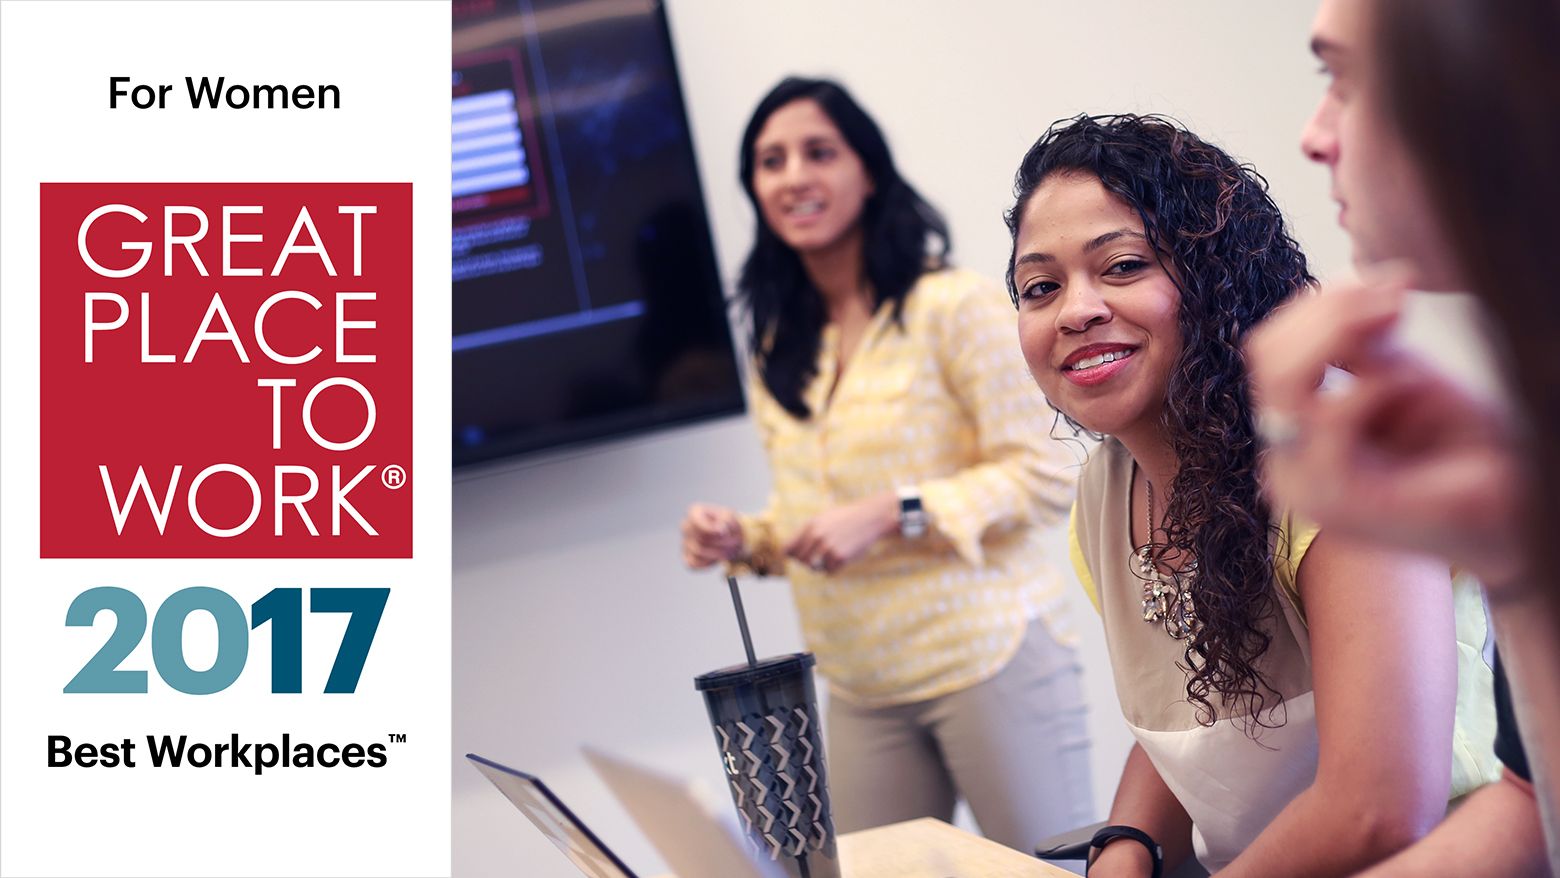 Great Place to Work® and Fortune Name Yext One of the Best Workplaces